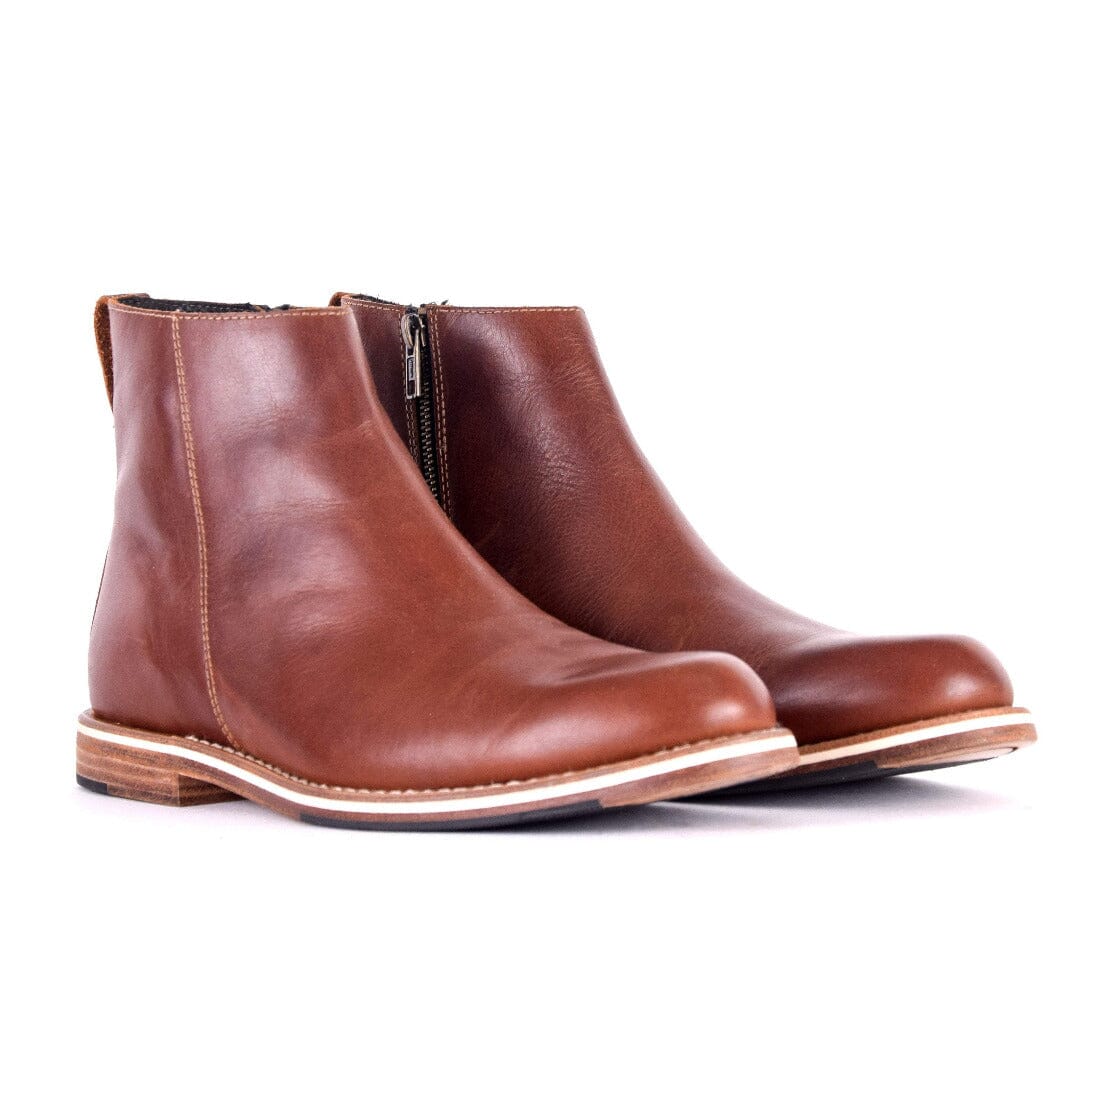 HELM Boots The Pablo, Brown